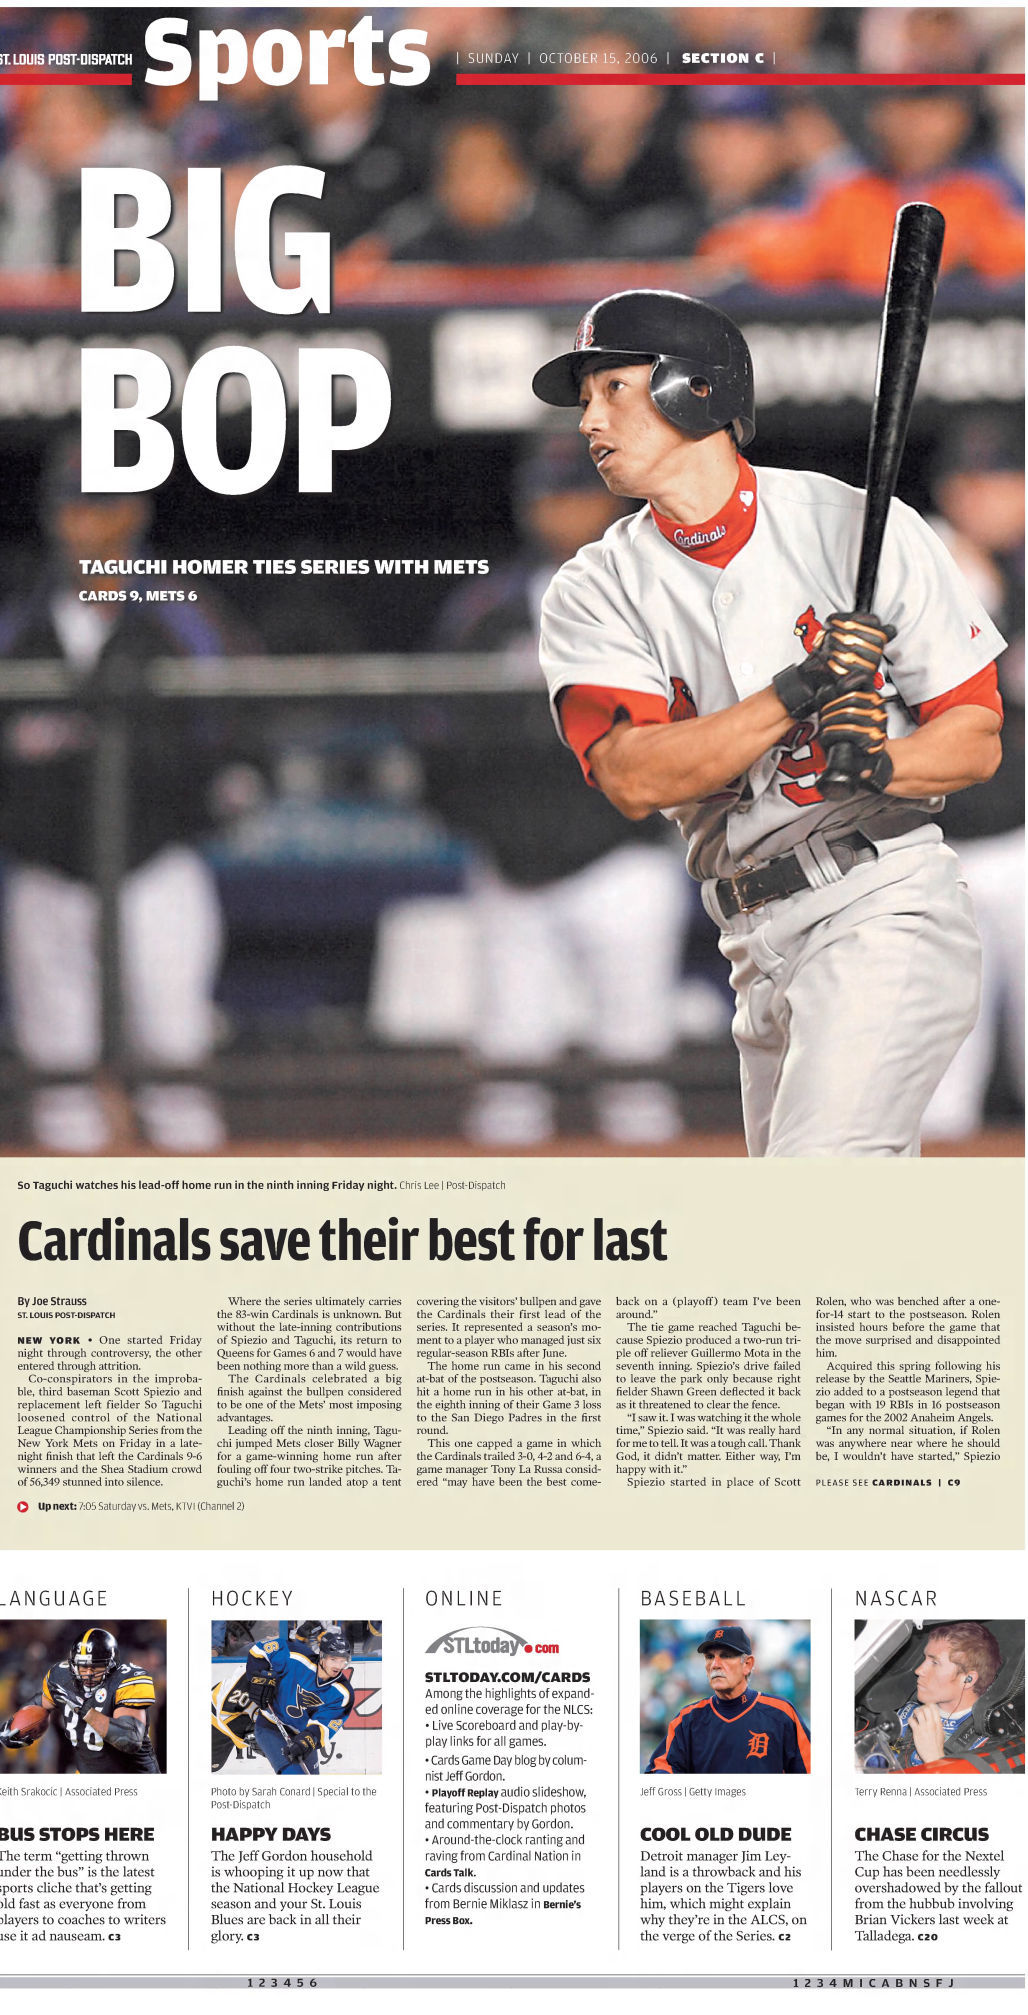 Pages of history: The 2006 St. Louis Cardinals postseason | St. Louis Cardinals | mediakits.theygsgroup.com